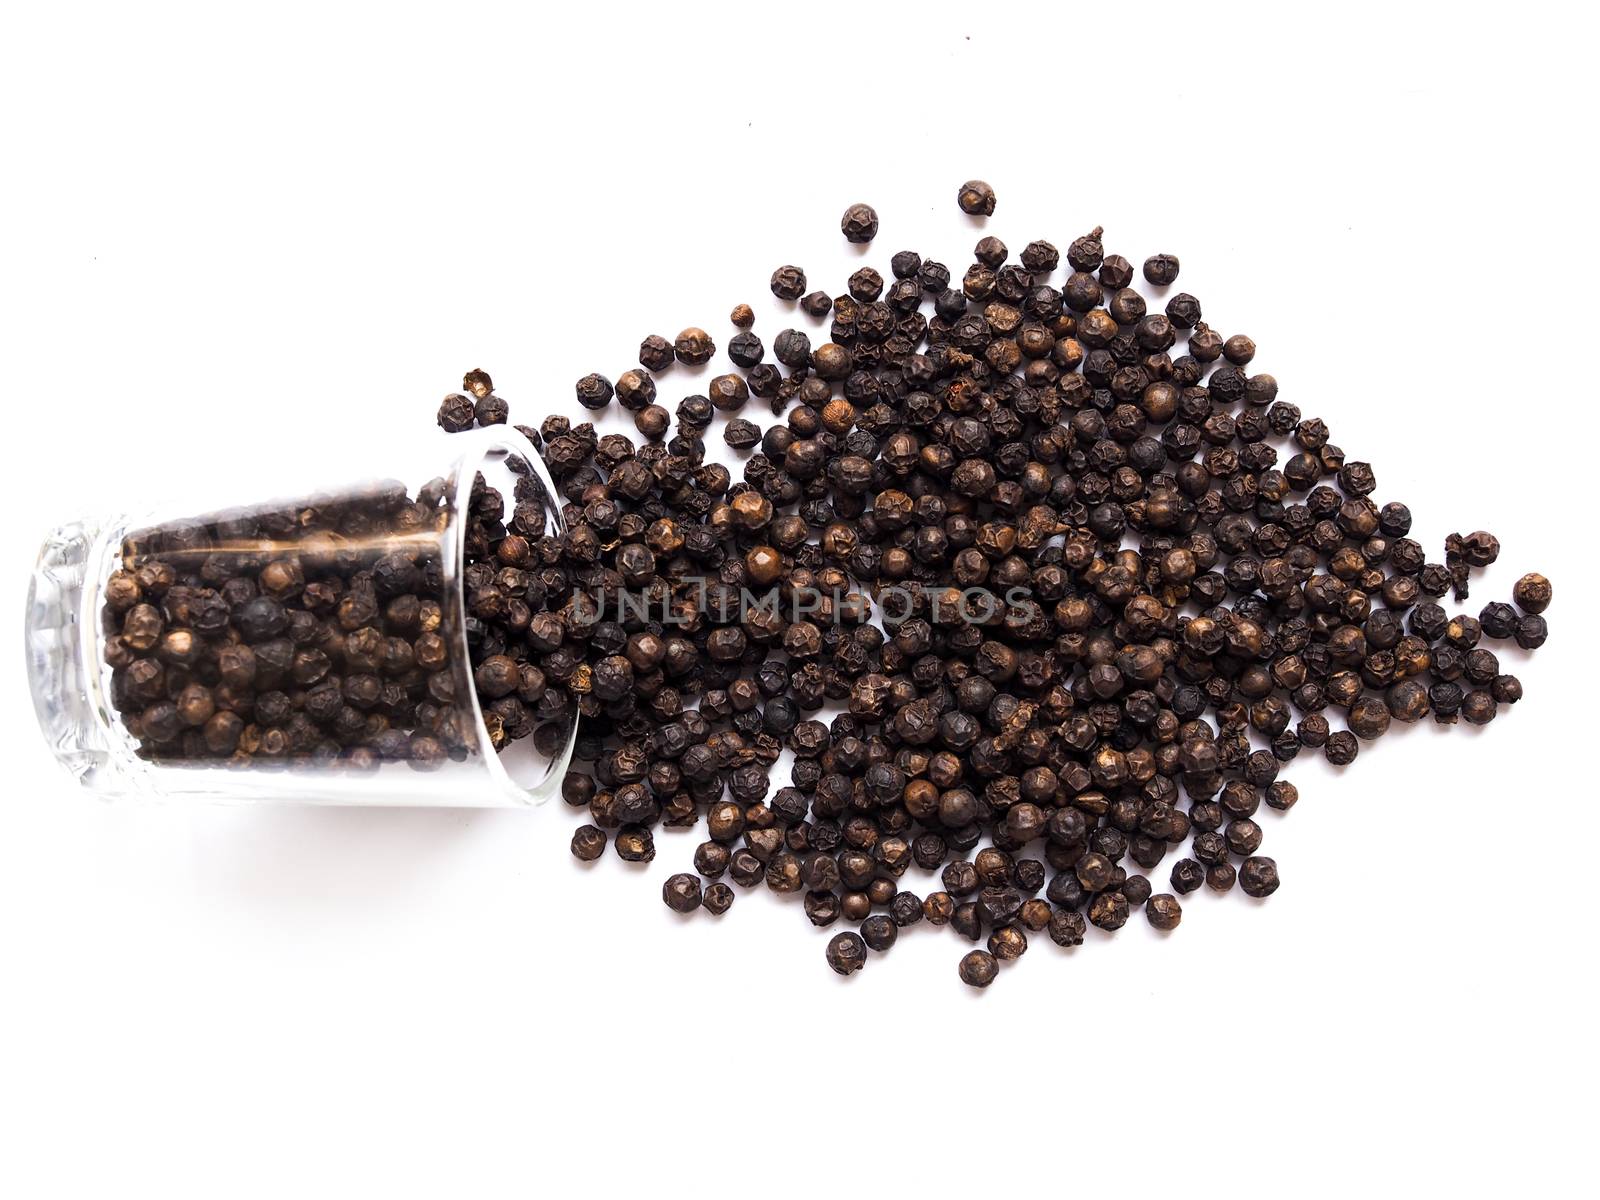 Dried black pepper seeds, peppercorn in a clear glass by kittima05